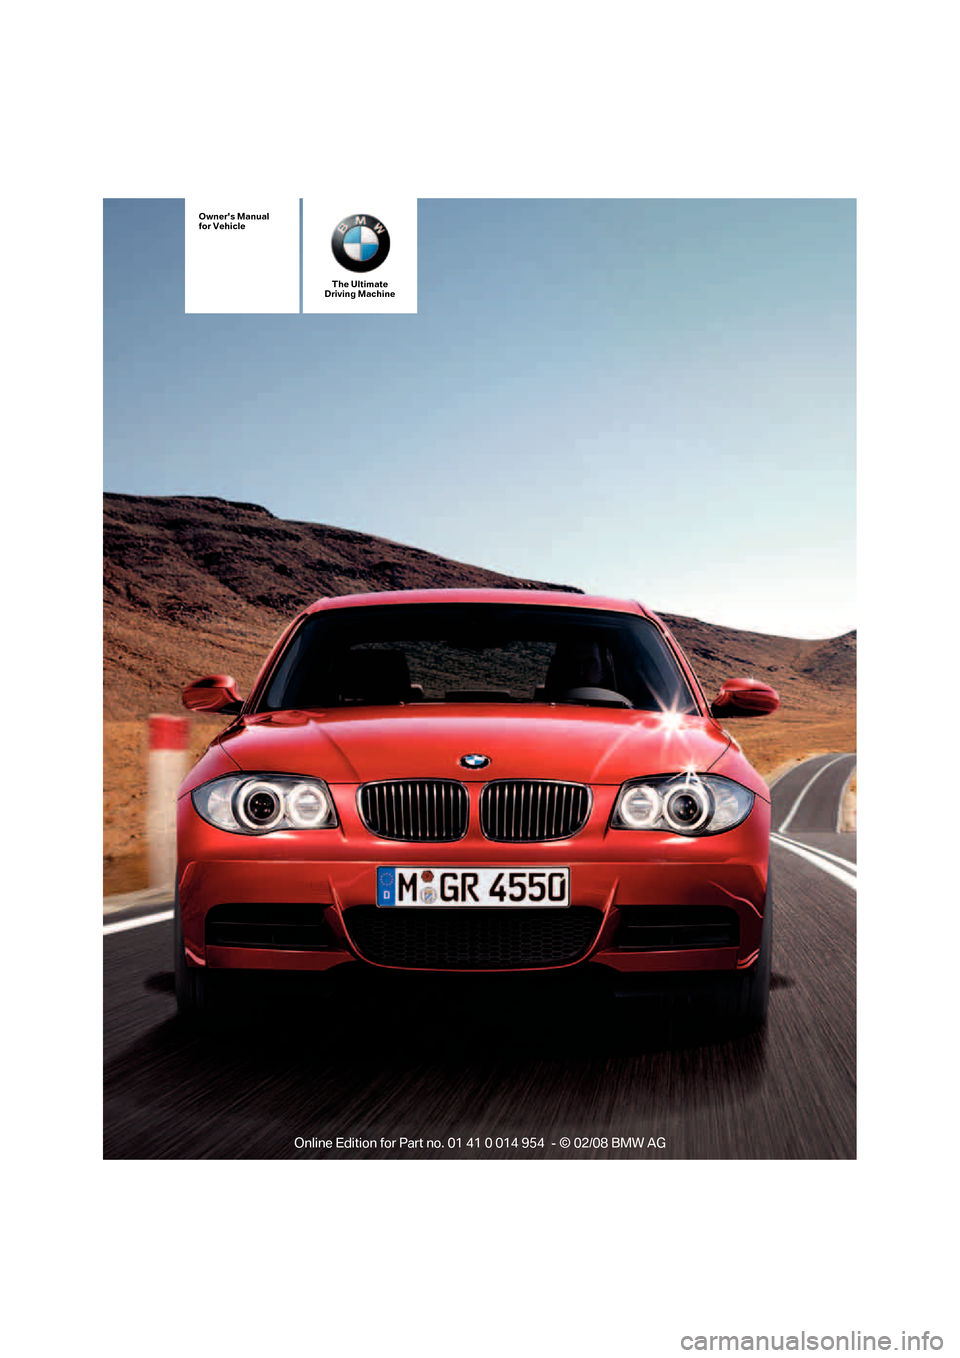 BMW 128I CONVERTIBLE 2008 E88 Owners Manual The Ultimate
Driving Machine
Owners Manual
for Vehicle 